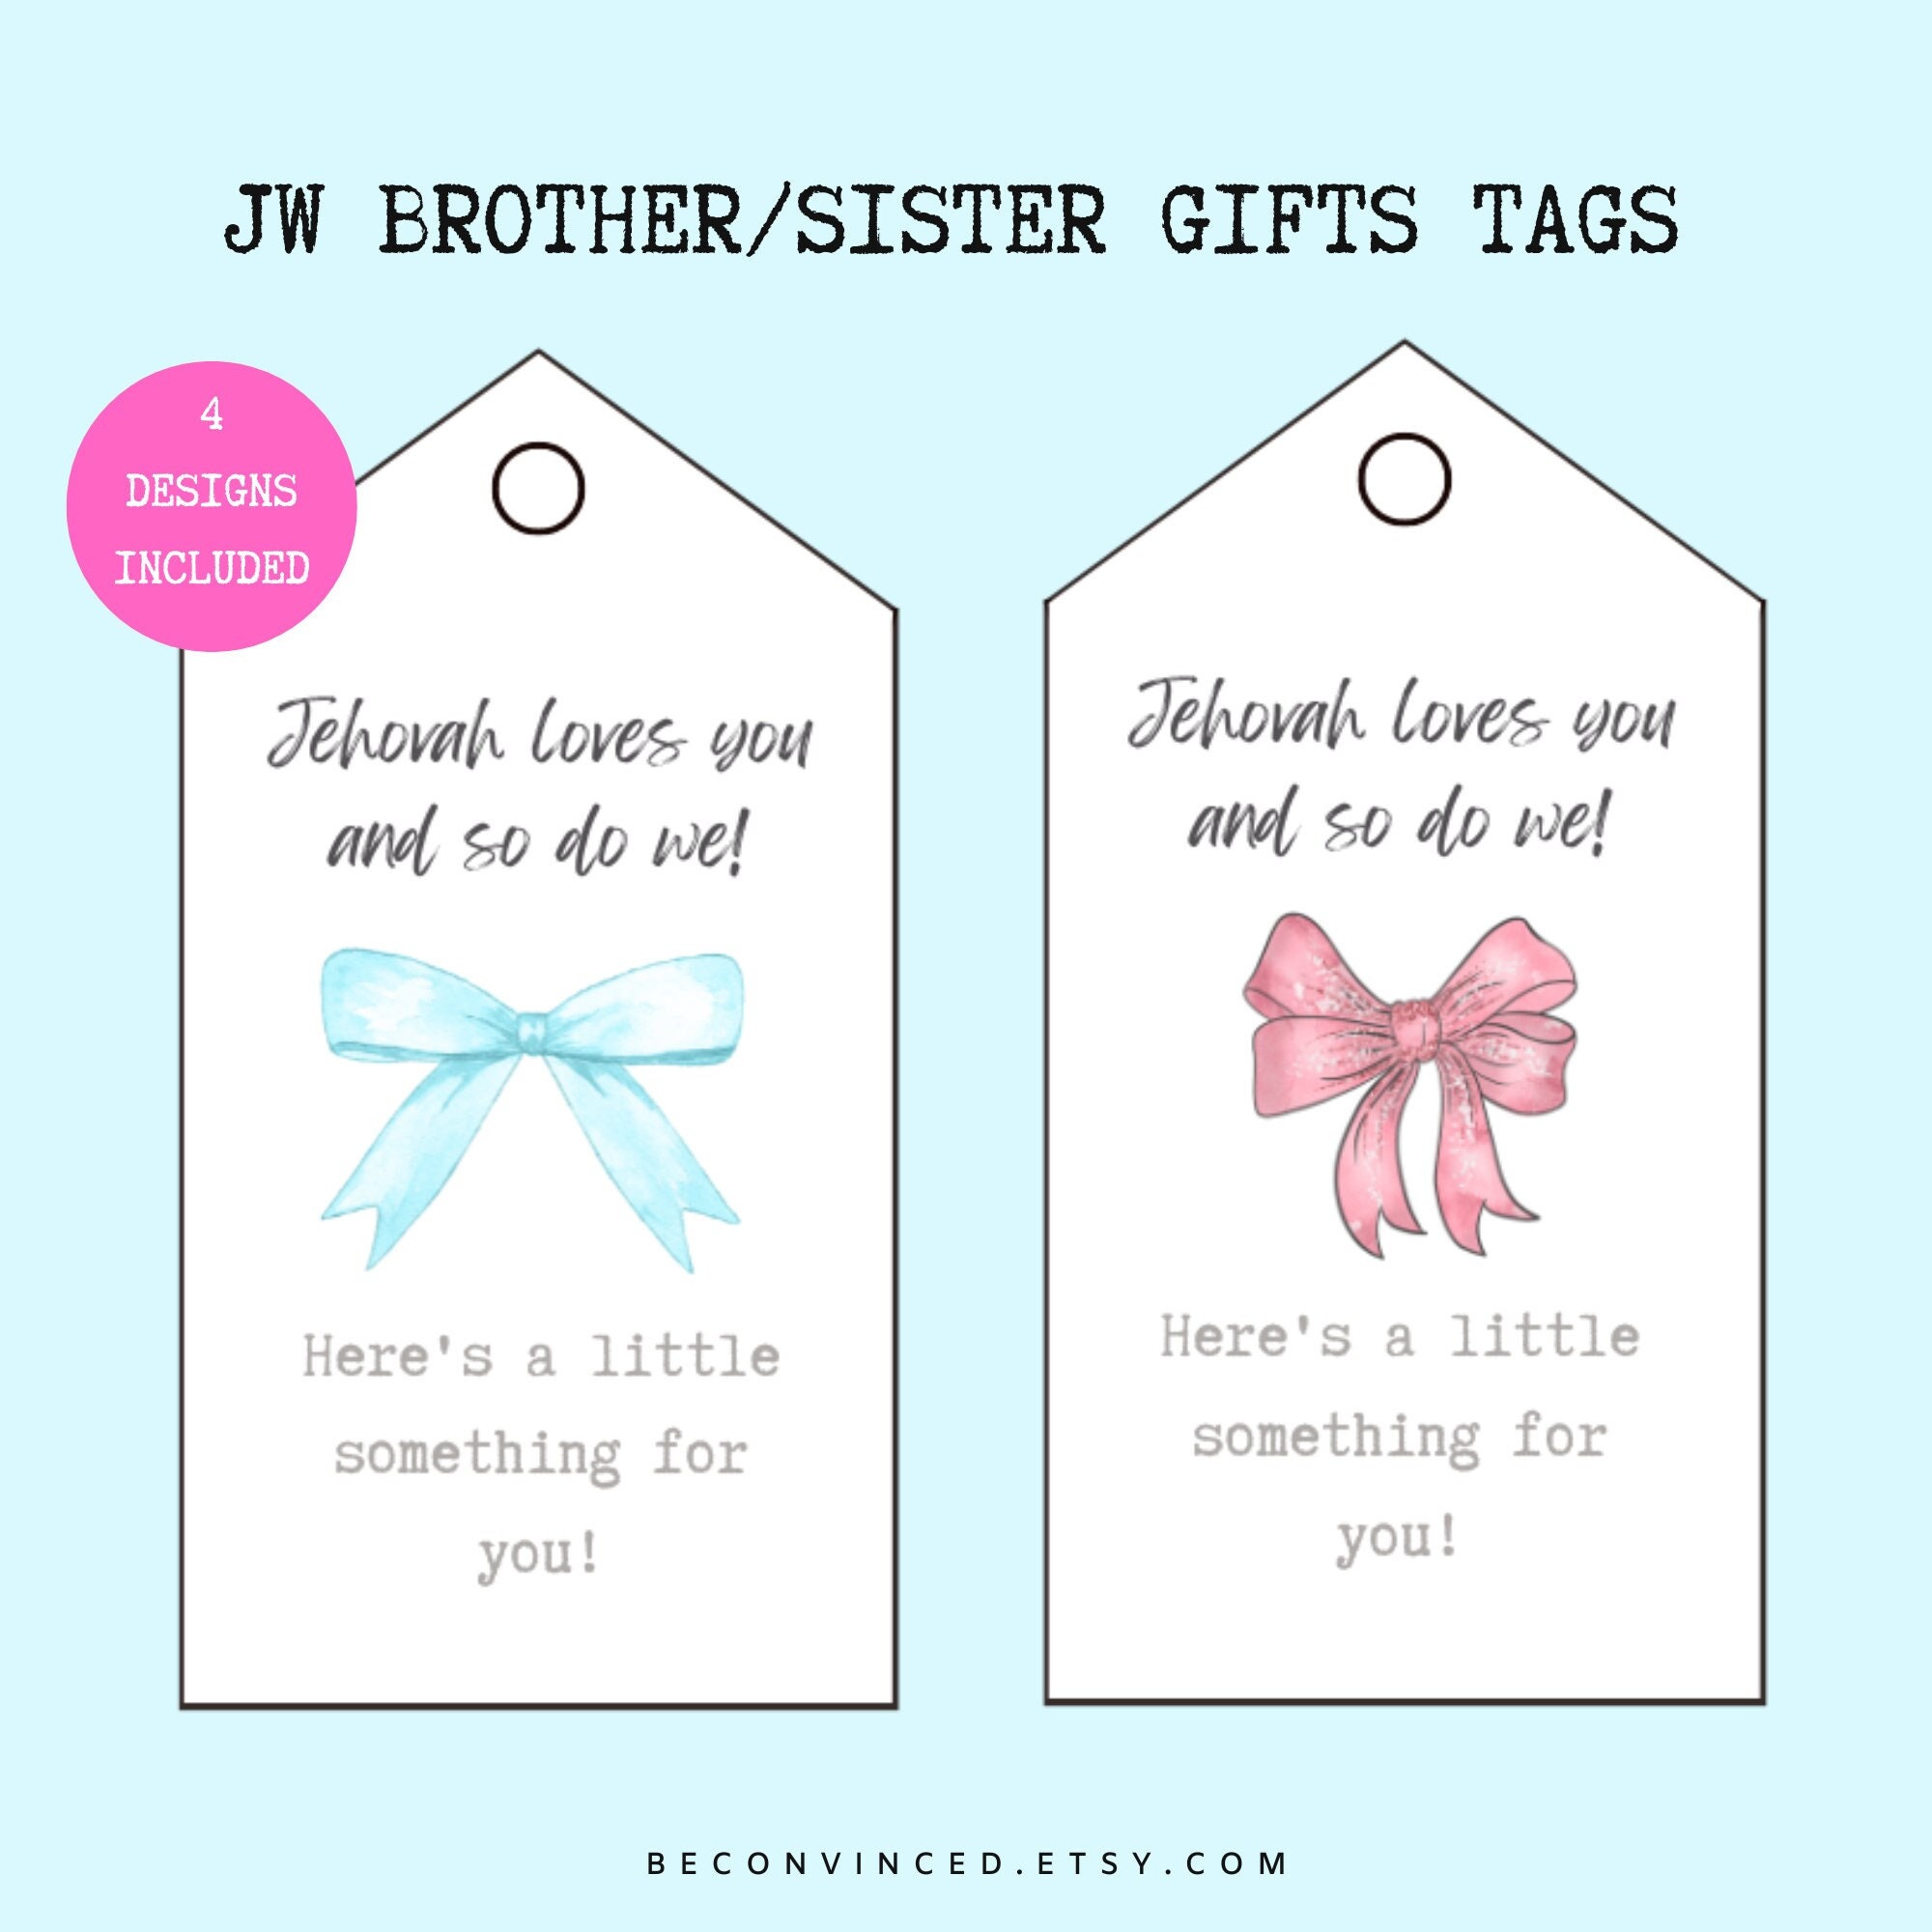 JW Gift Tags Jw Gift Tags for Sisters Jw Gift Tags for Brothers